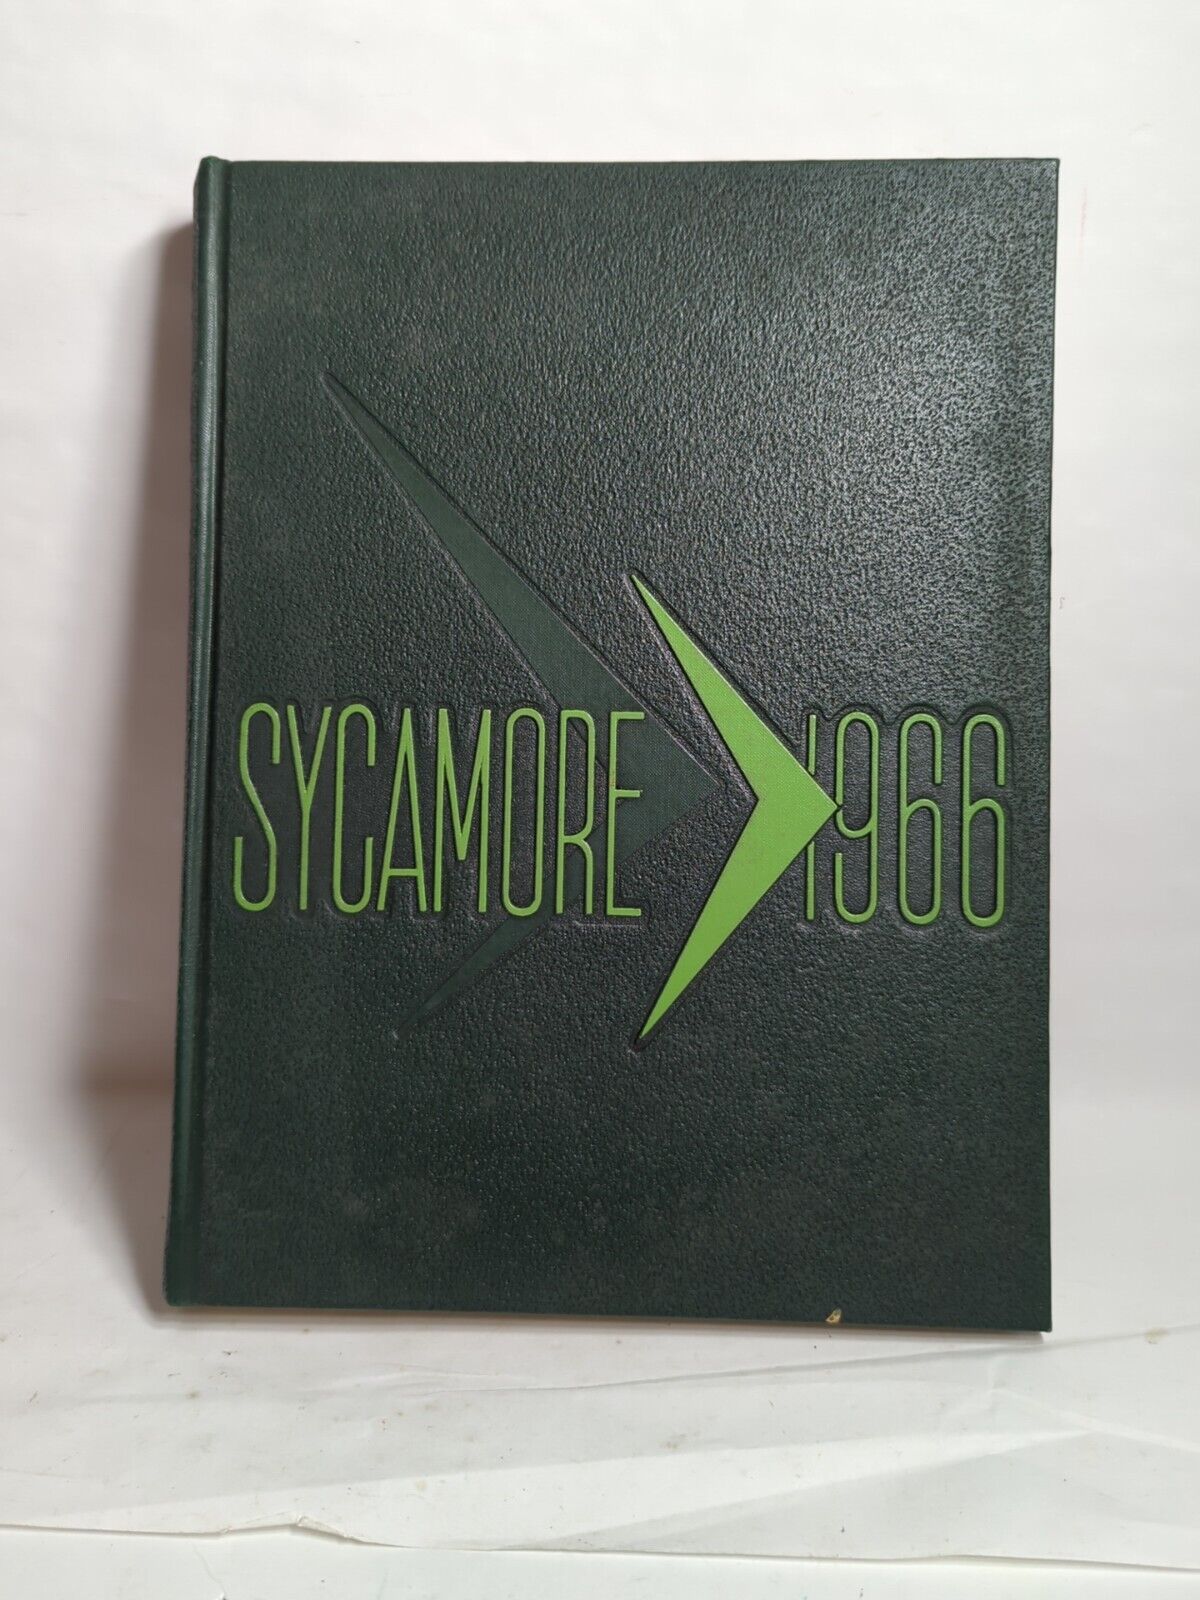 Vintage 1966 Sycamore Indiana State University Yearbook Terre Haute IN